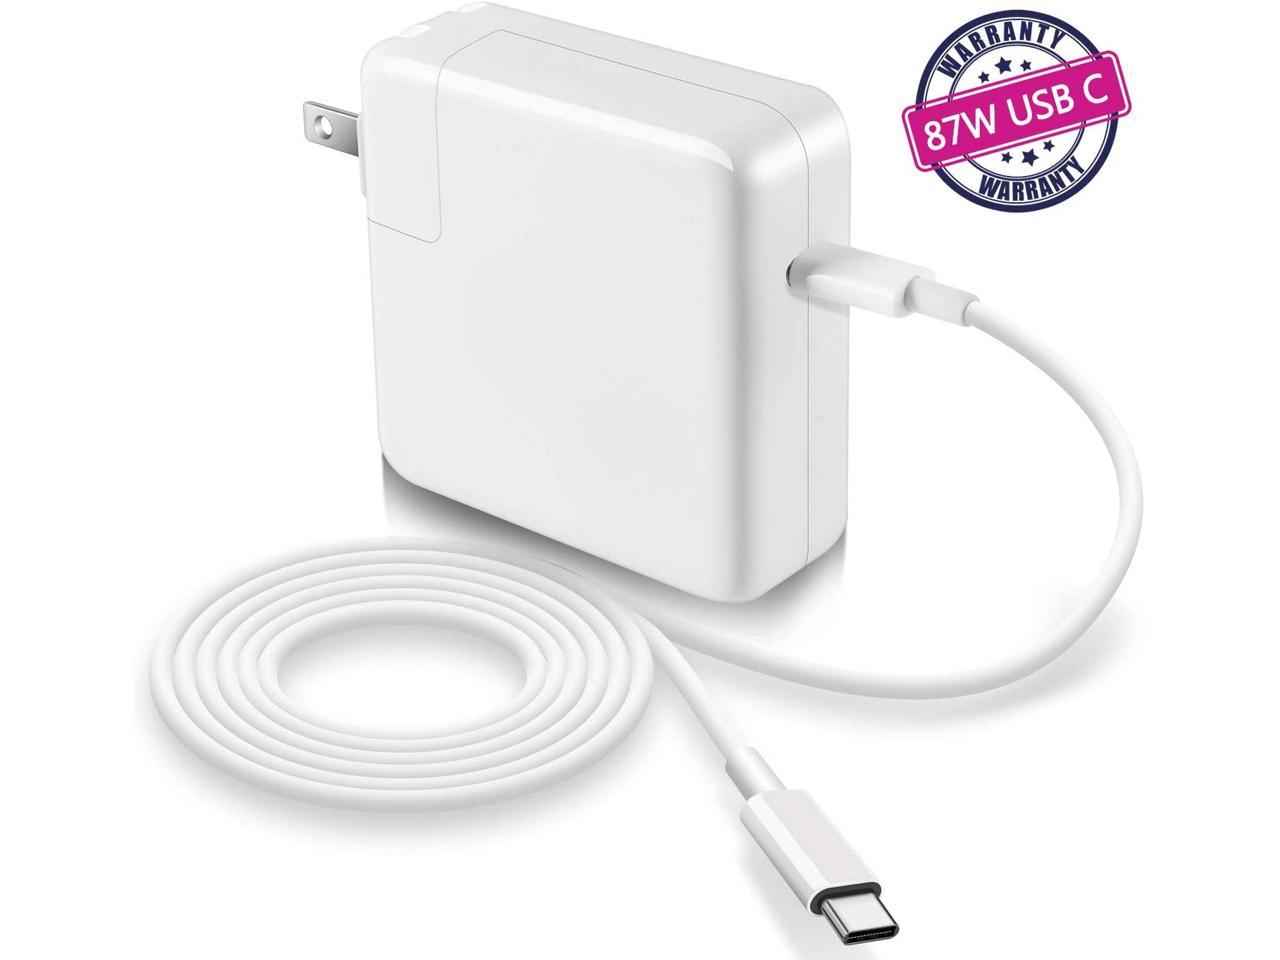 macbook air 13 inch charger apple store